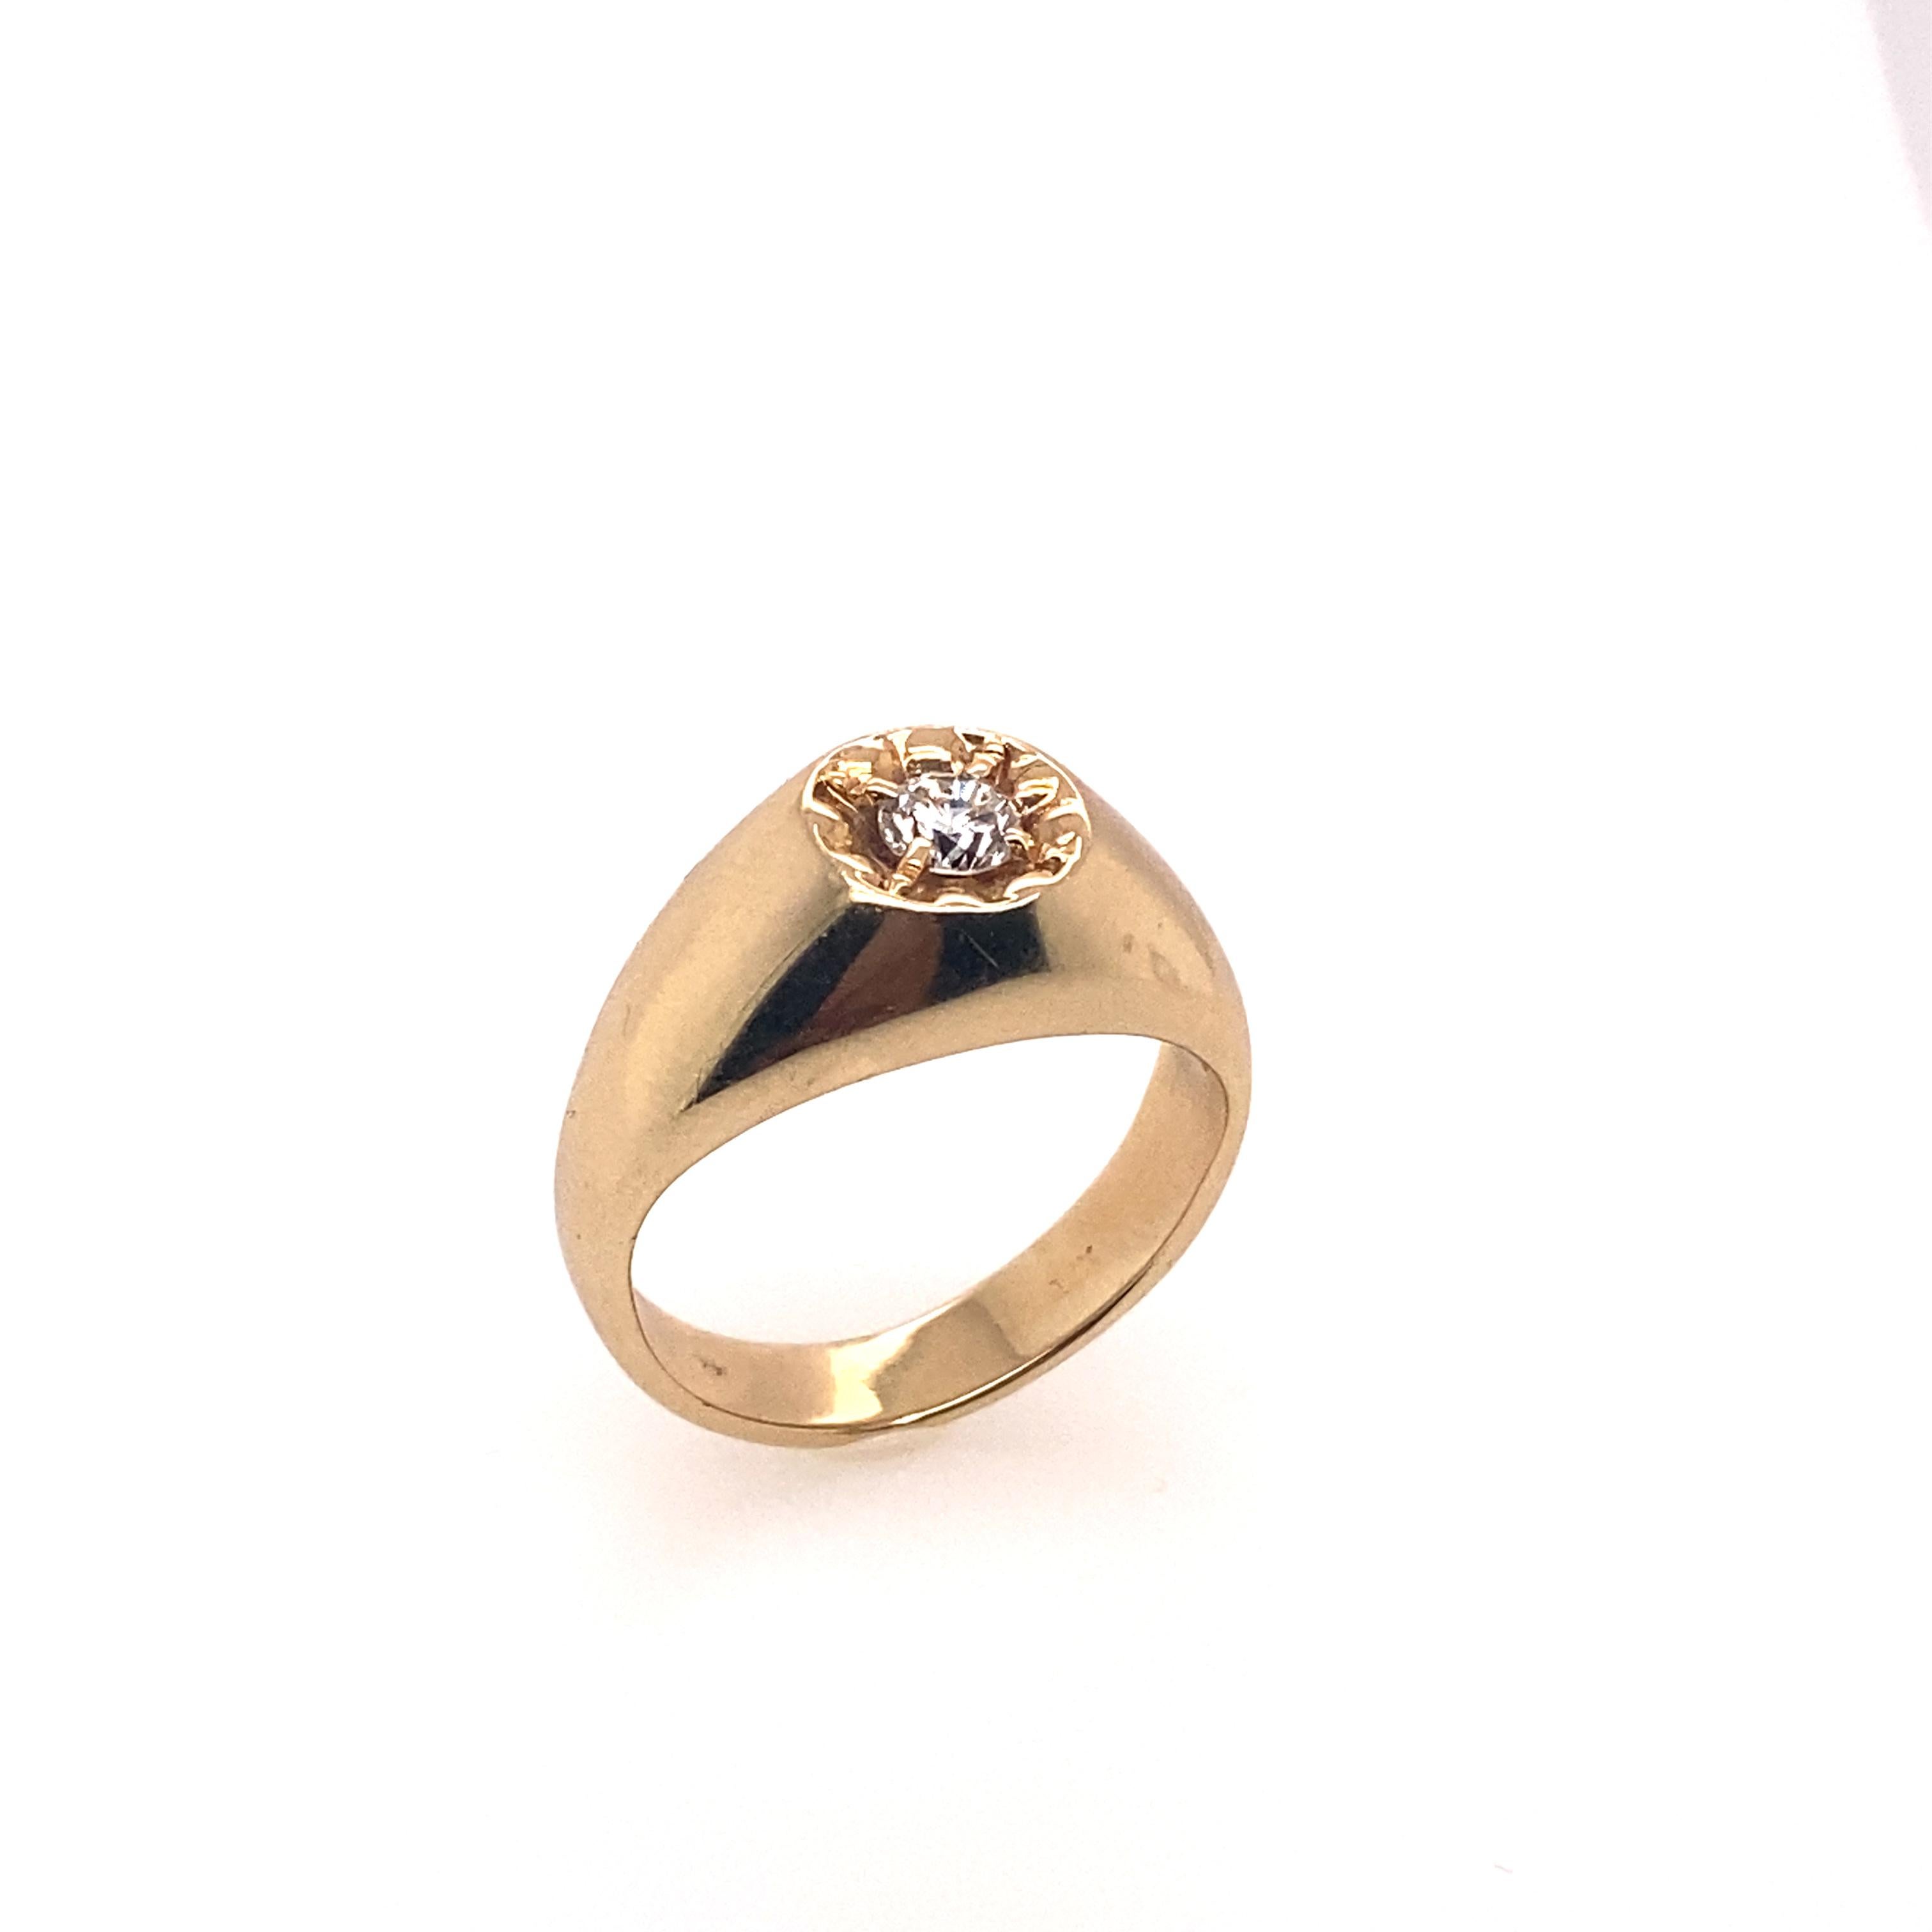 0.30 carat round diamond set as a center stone in the 14K thick band ring. The overall look of this yellow gold thick band ring features big and bold impressions. Simple but powerful. 

Center Diamond Weight: 0.30 carat
Center Diamond Shape: